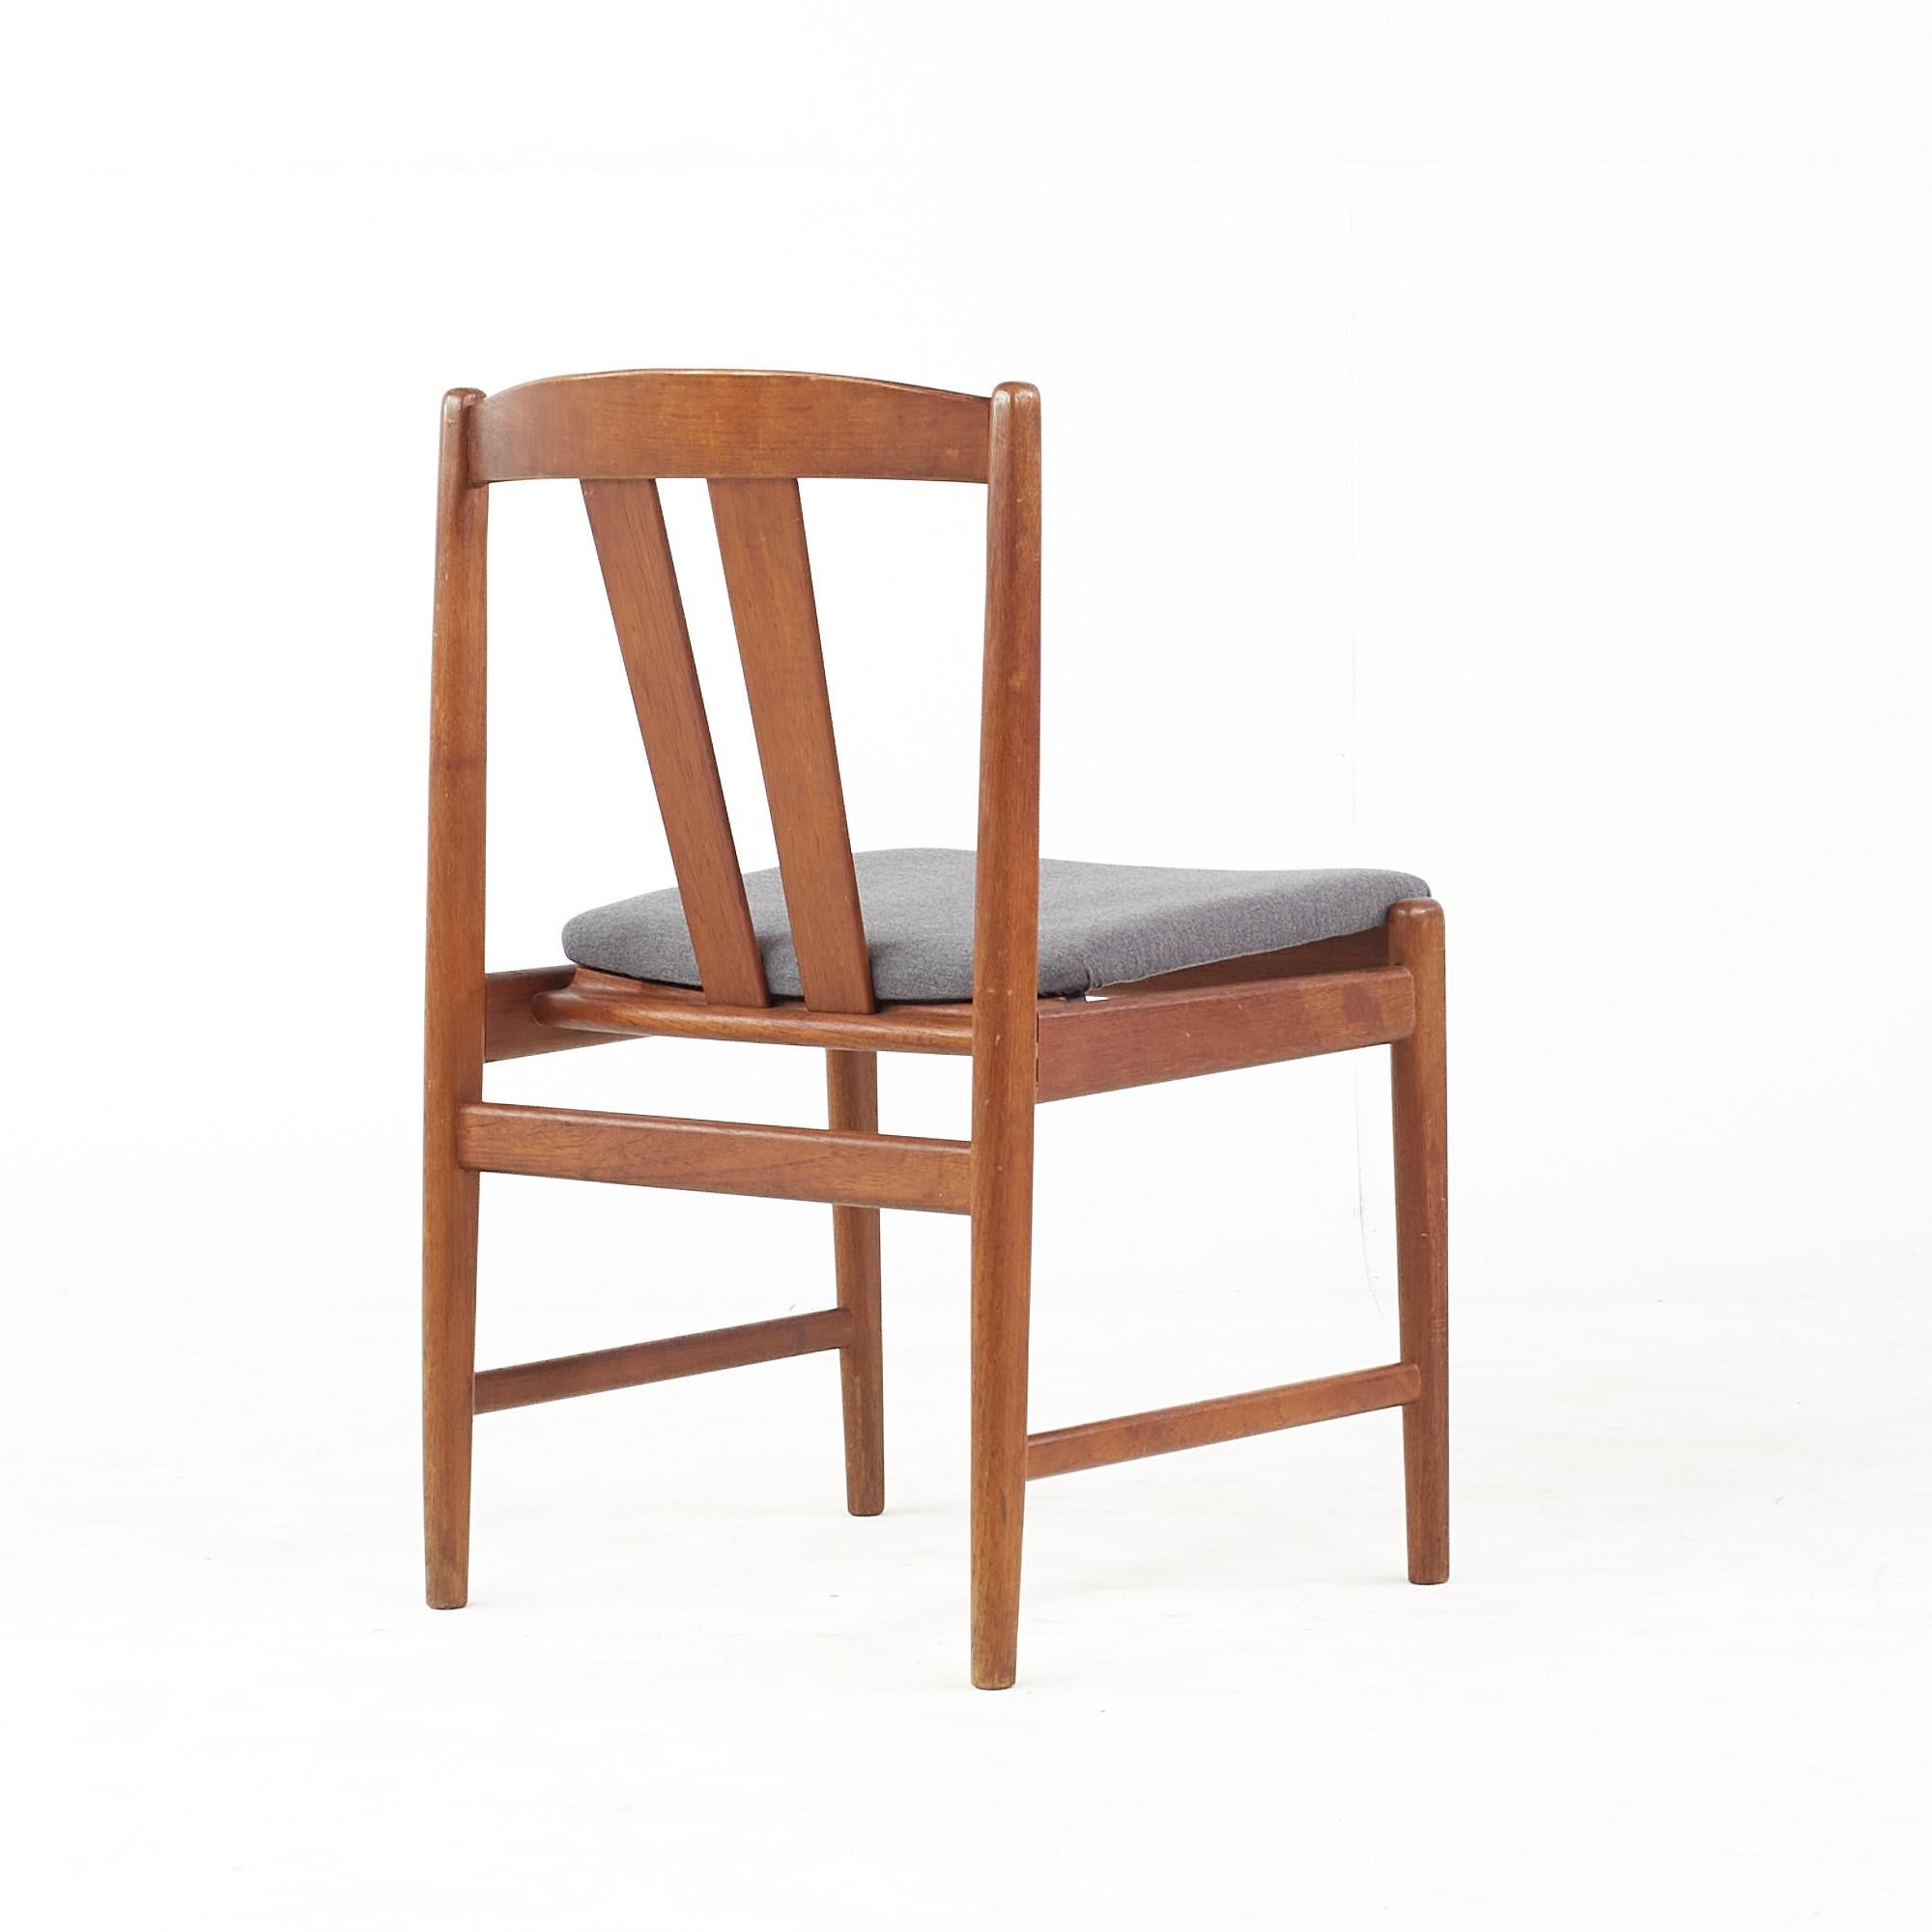 Upholstery Folke Ohlsson for Dux Mid Century Teak Wishbone Dining Chairs - Set of 4 For Sale